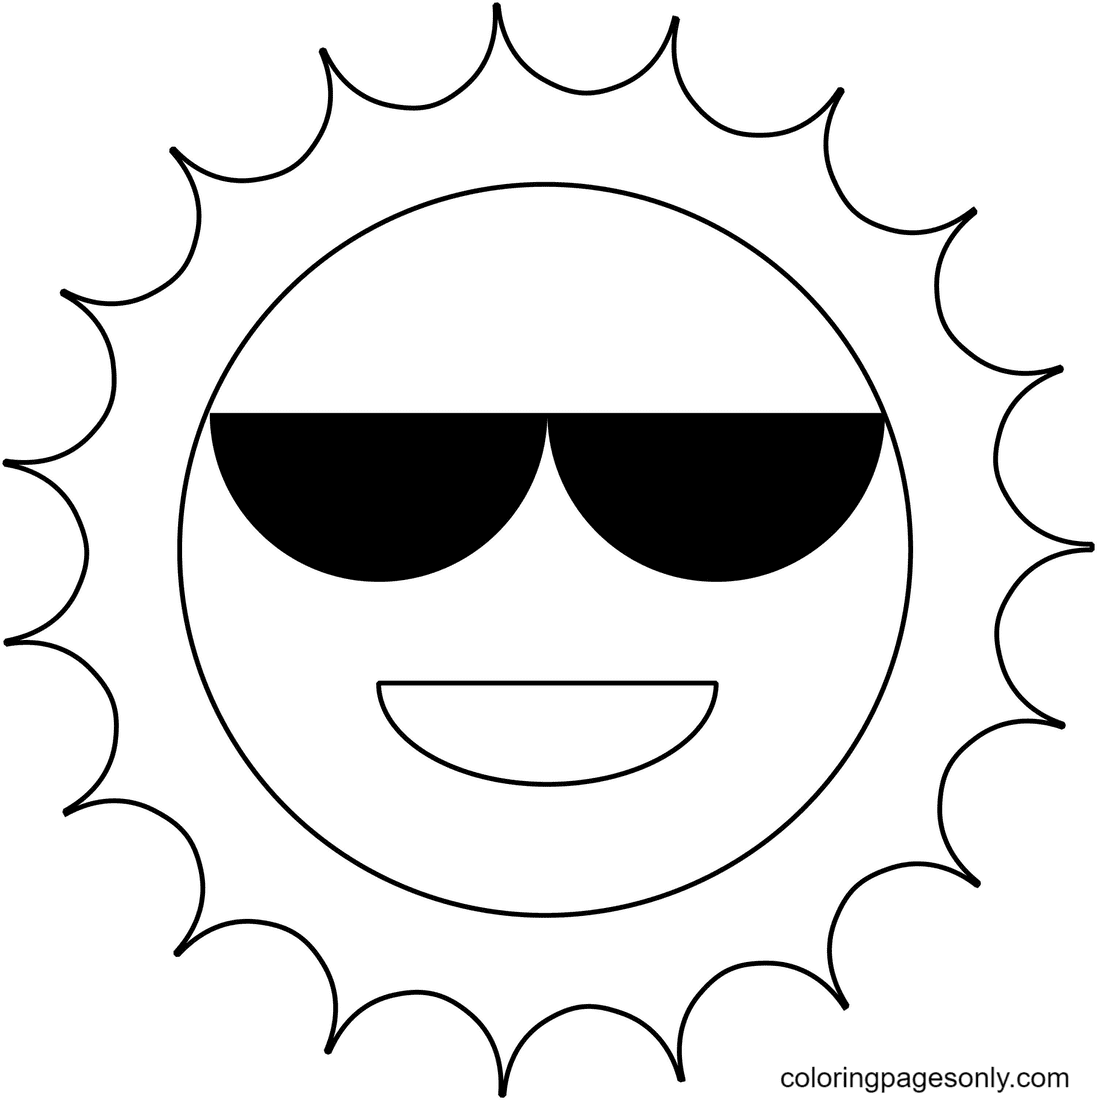 Sun and Sunglasses Coloring Page